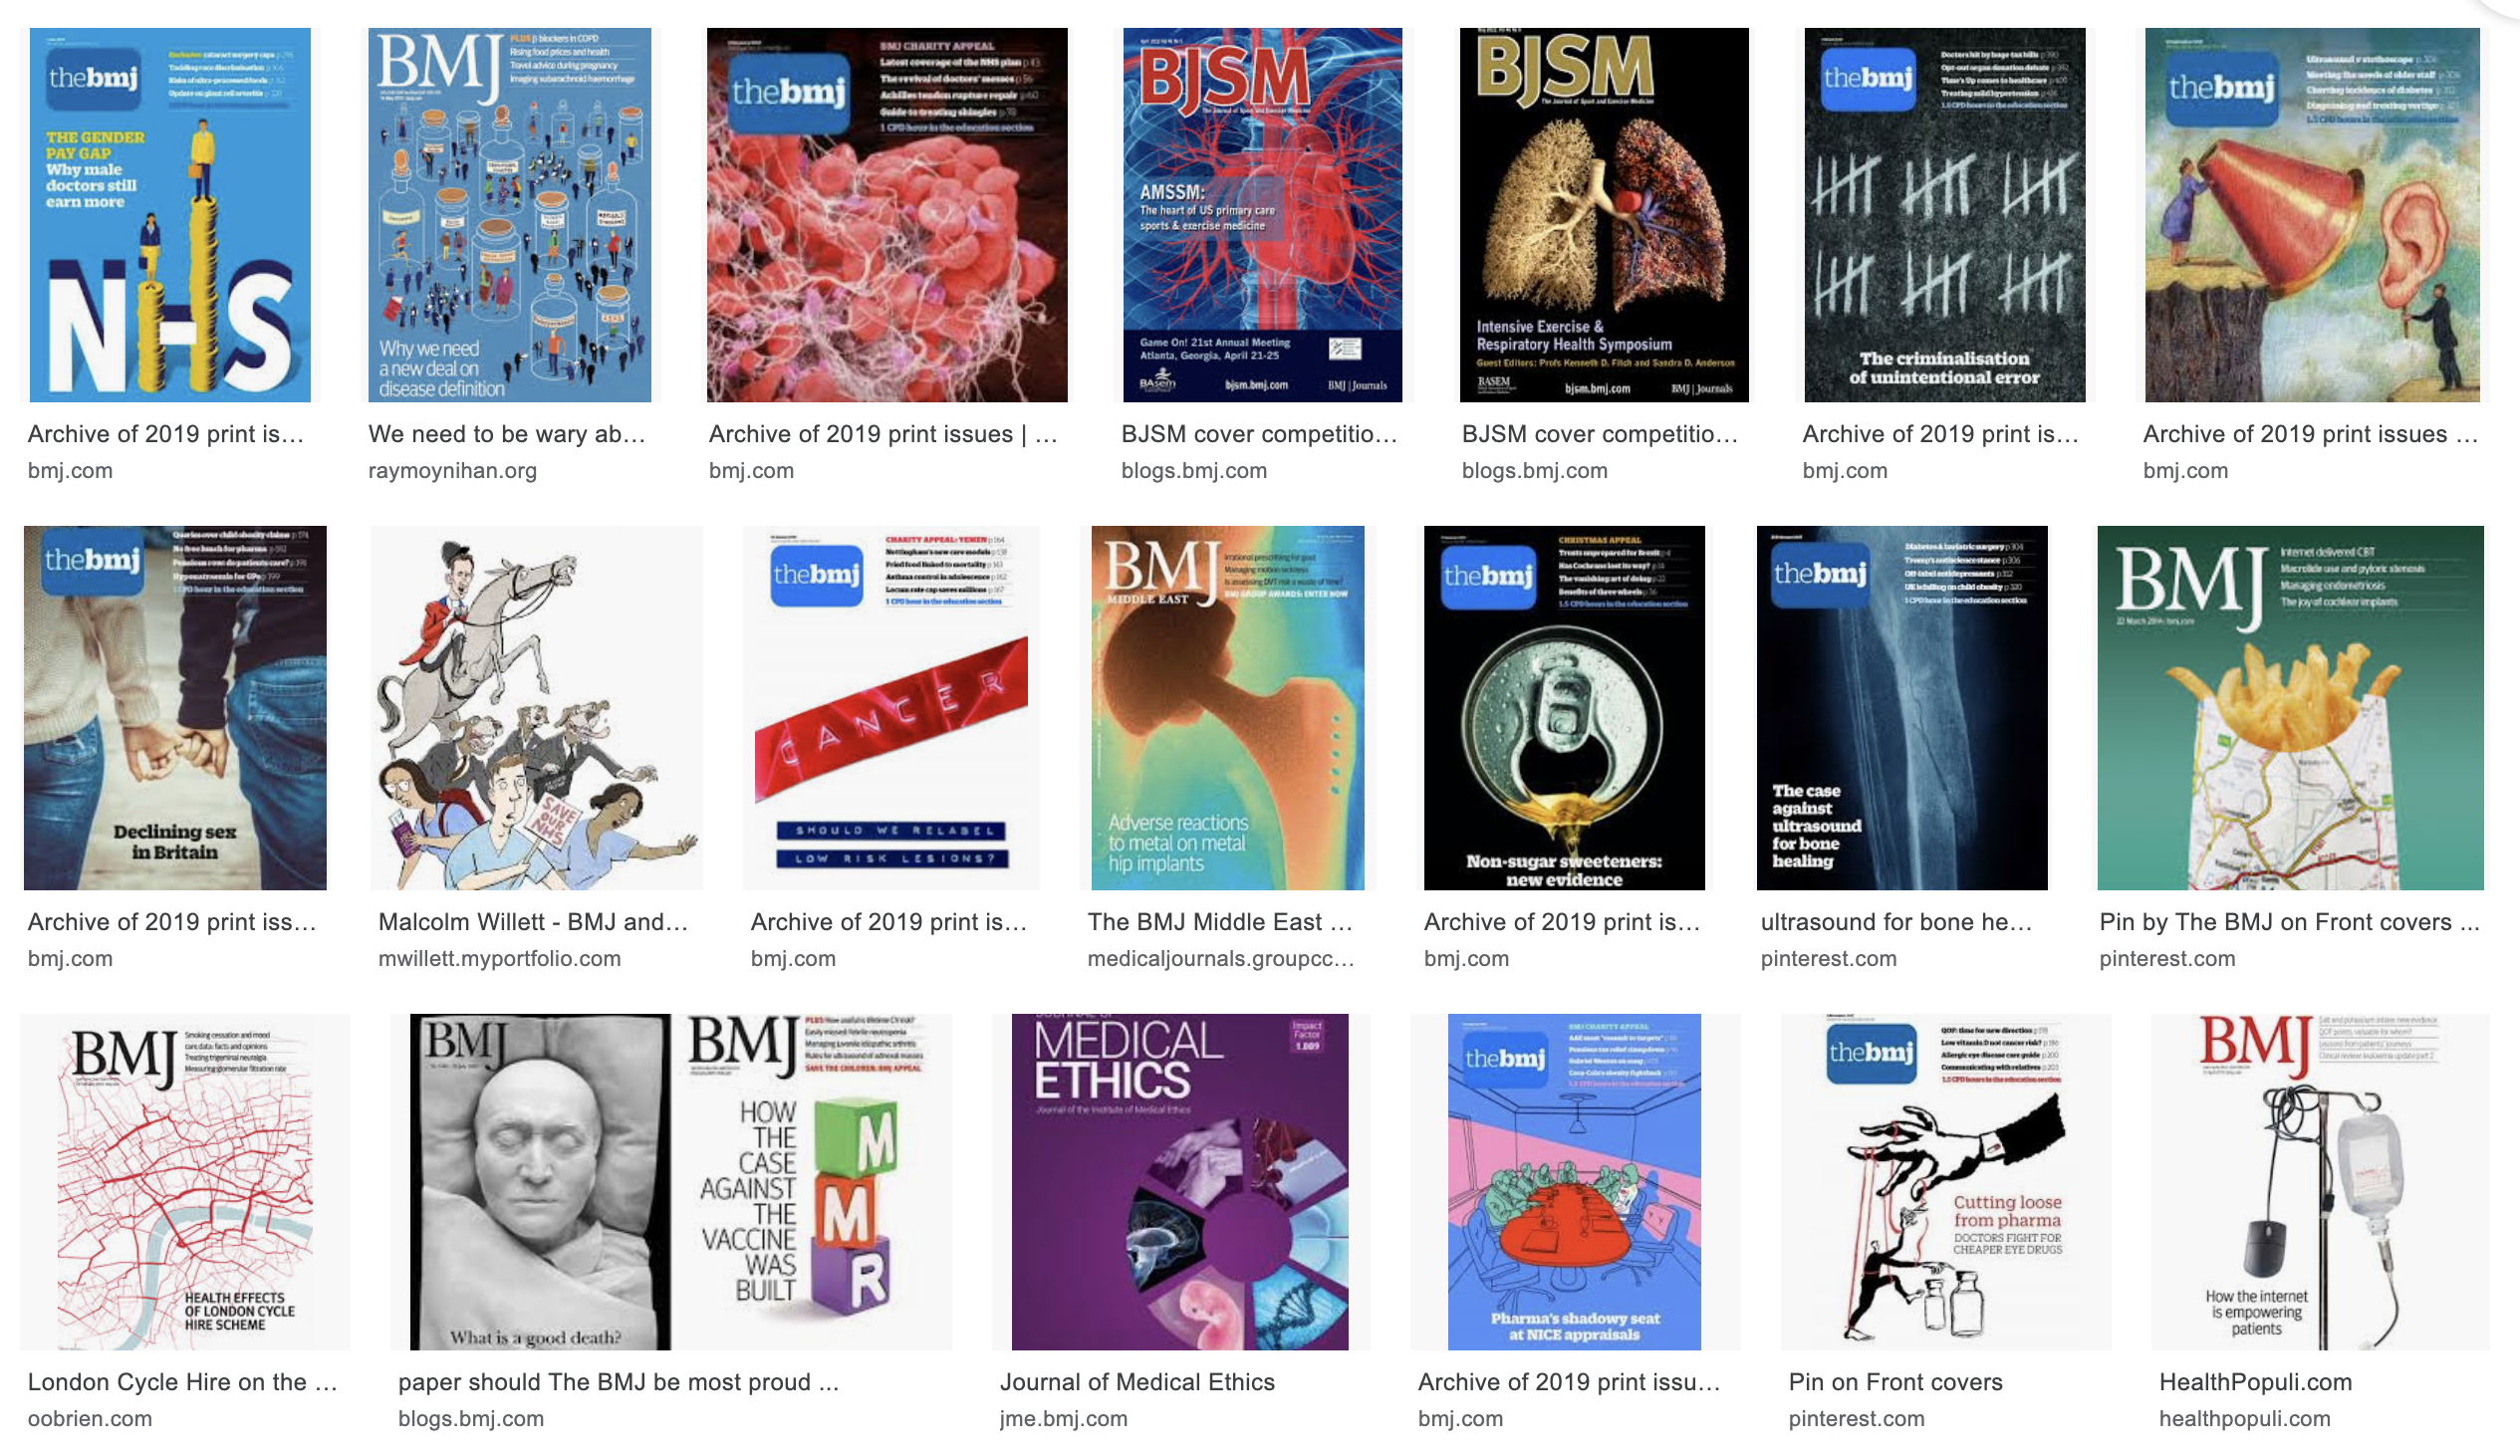 Some examples of BMJ cover illustrations courtesy of Google images.